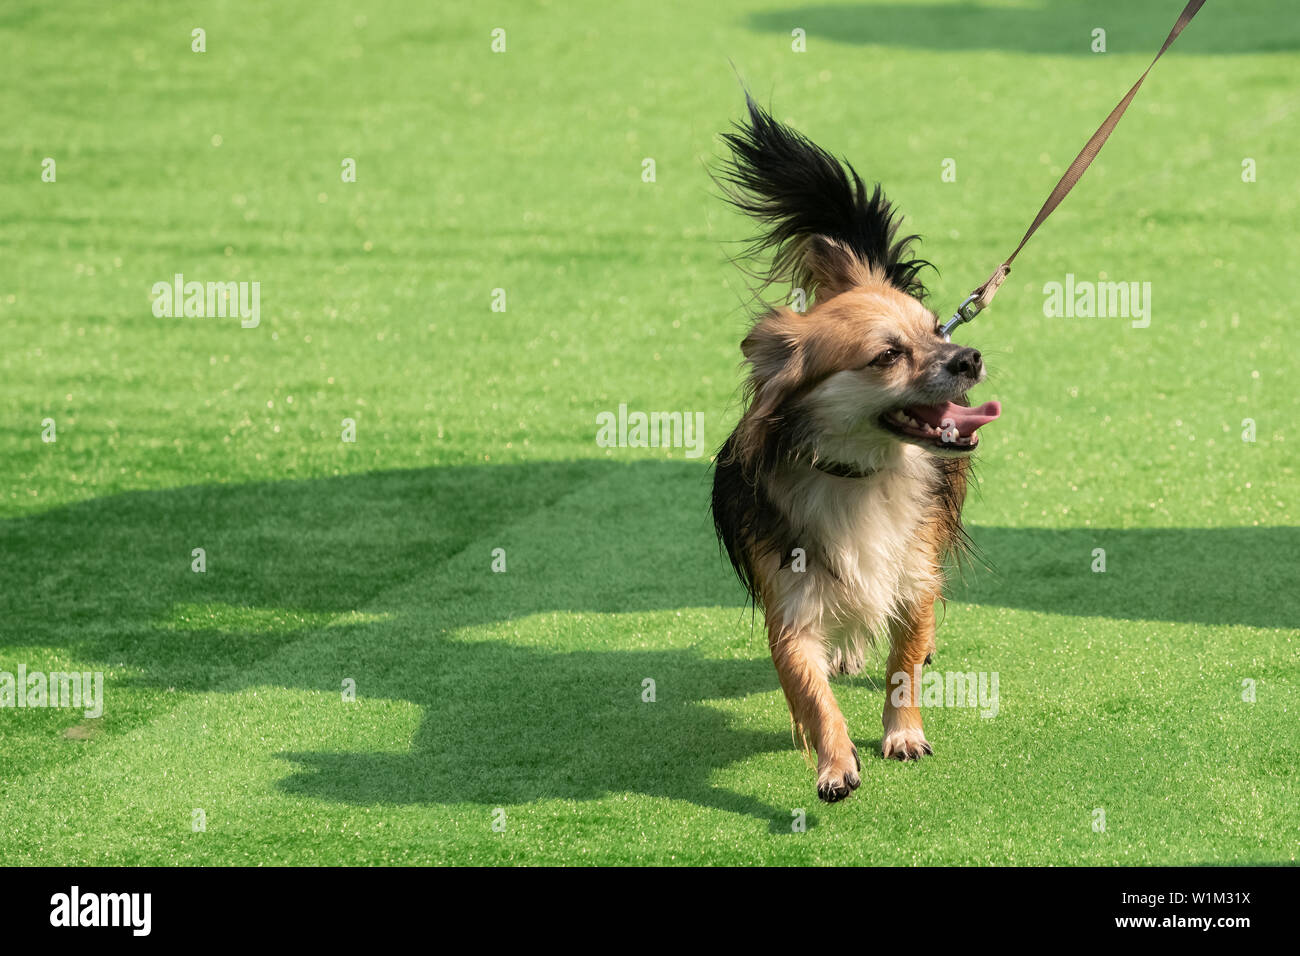 description: white with red adult Chihuahua dog standing on green grass portrait Stock Photo